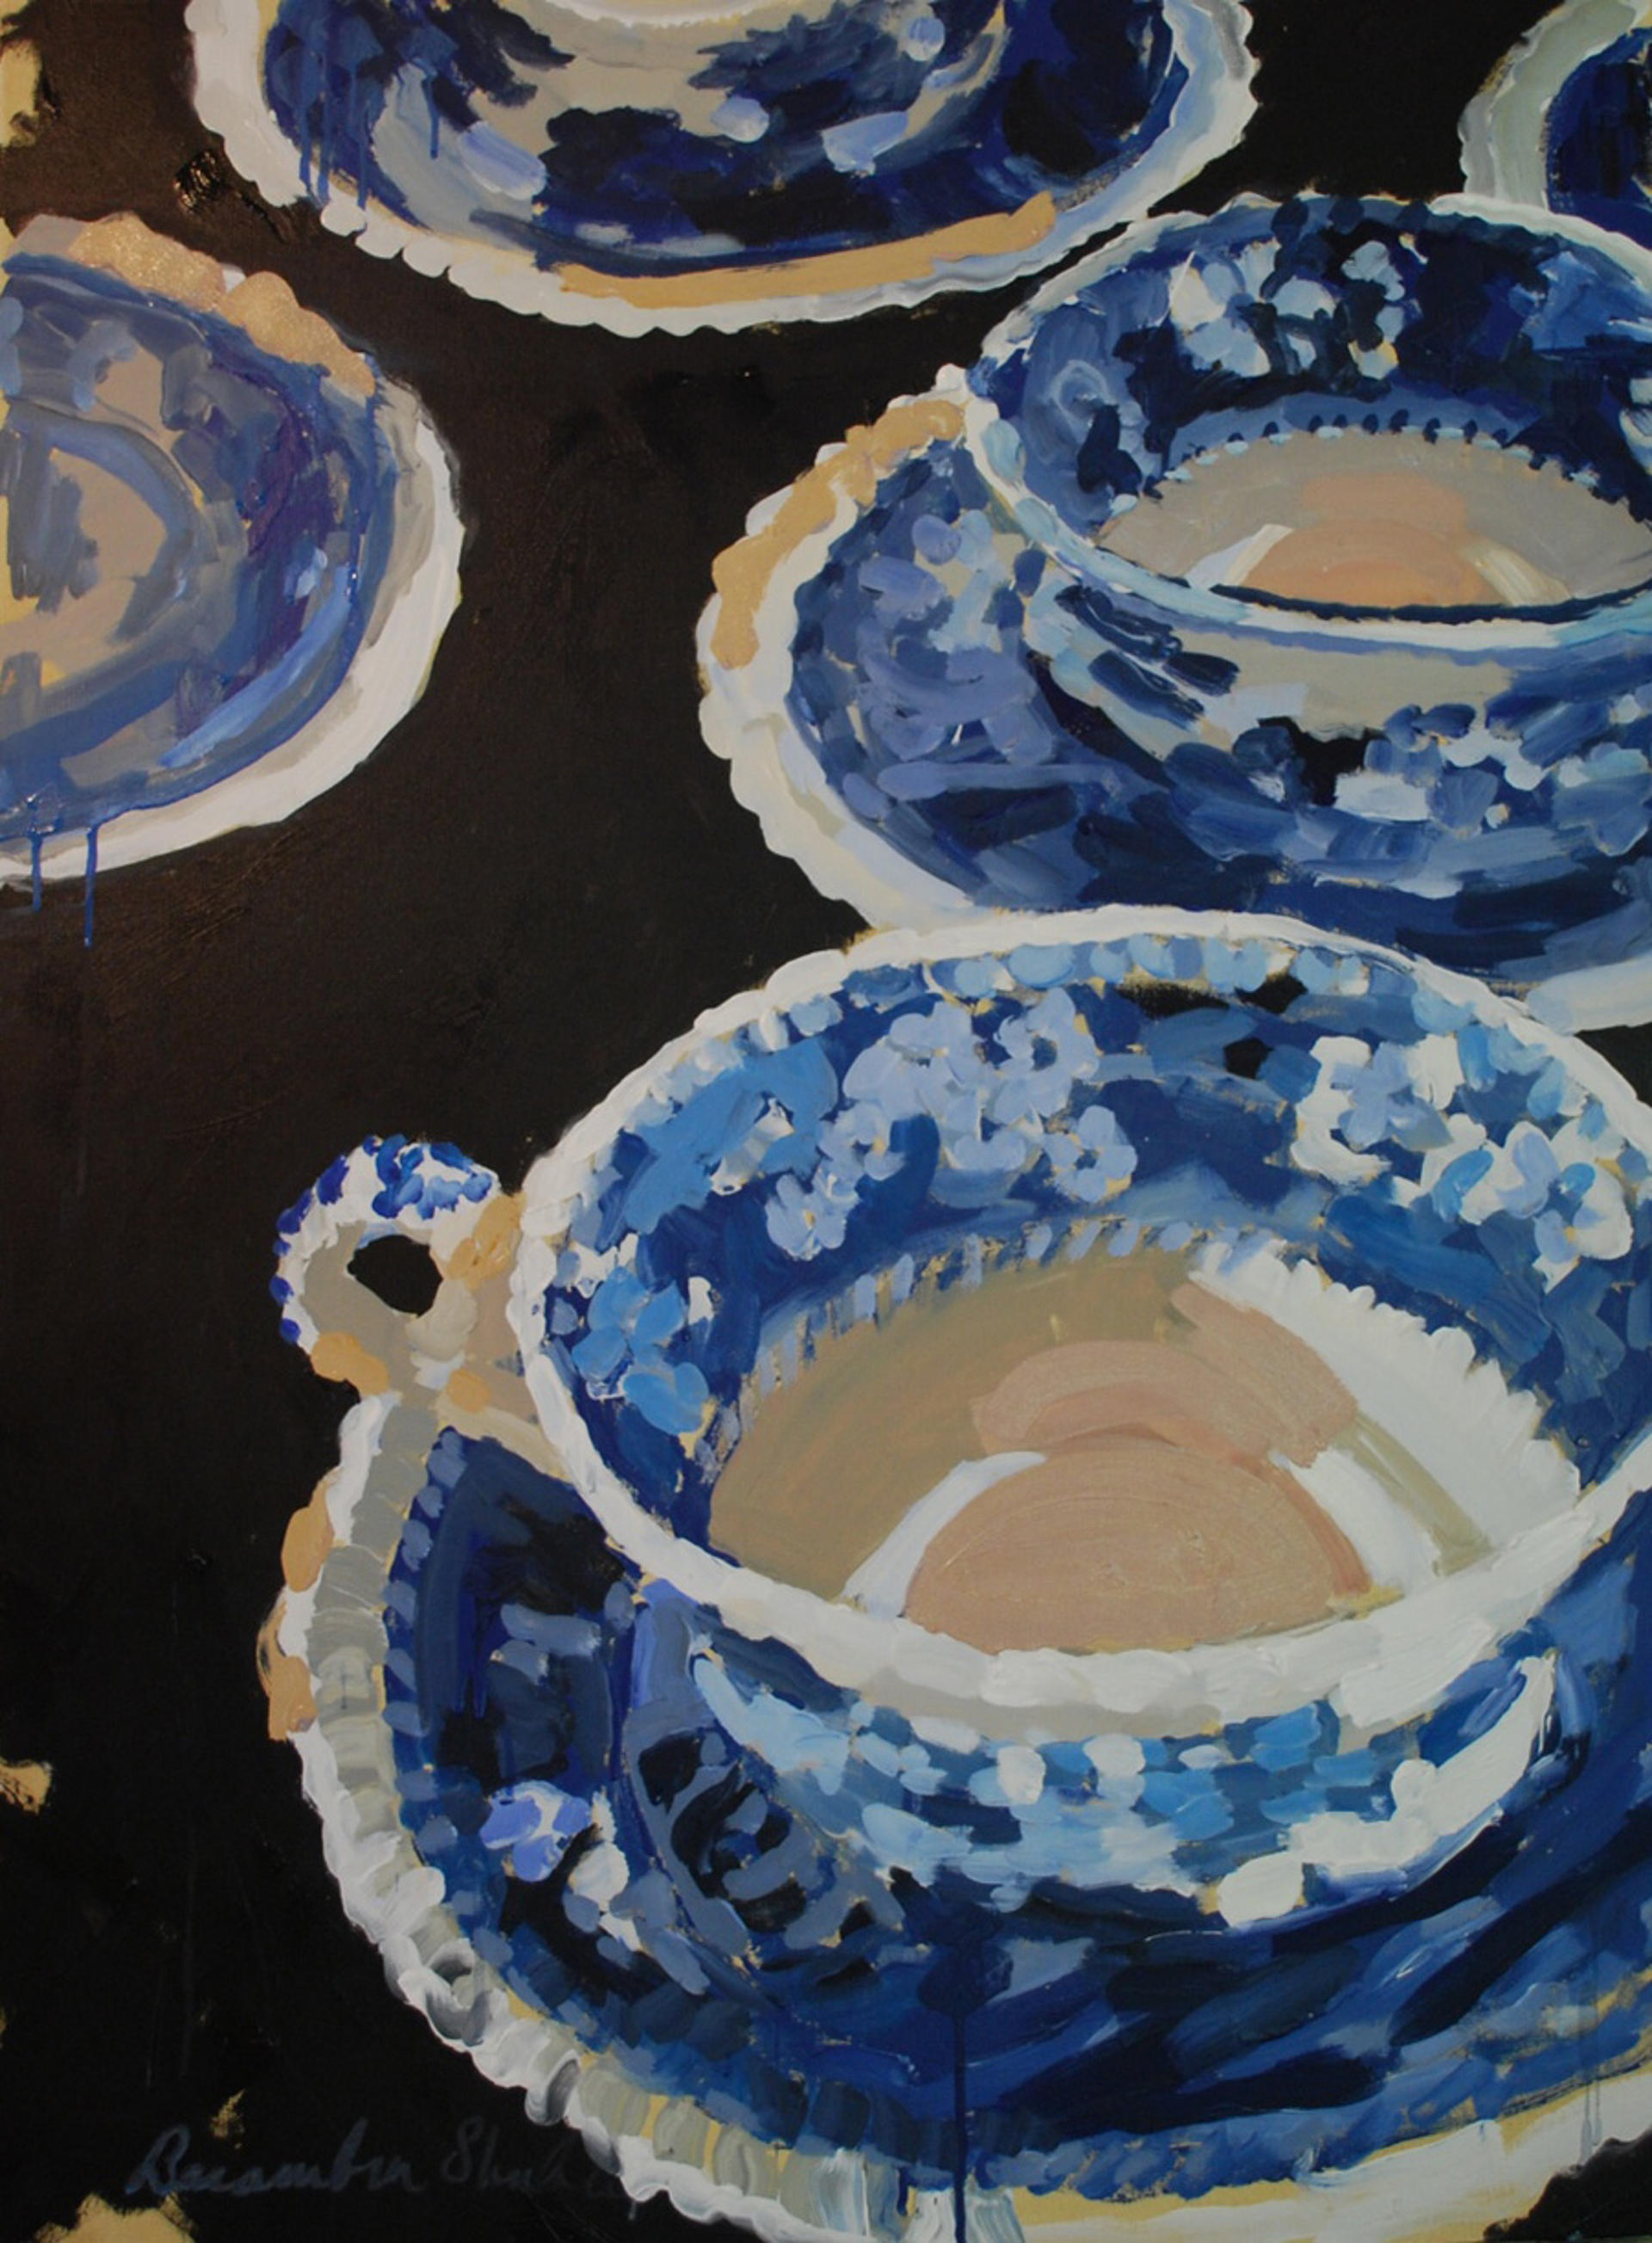 Blue Cups and Saucers by Laura Lacambra Shubert